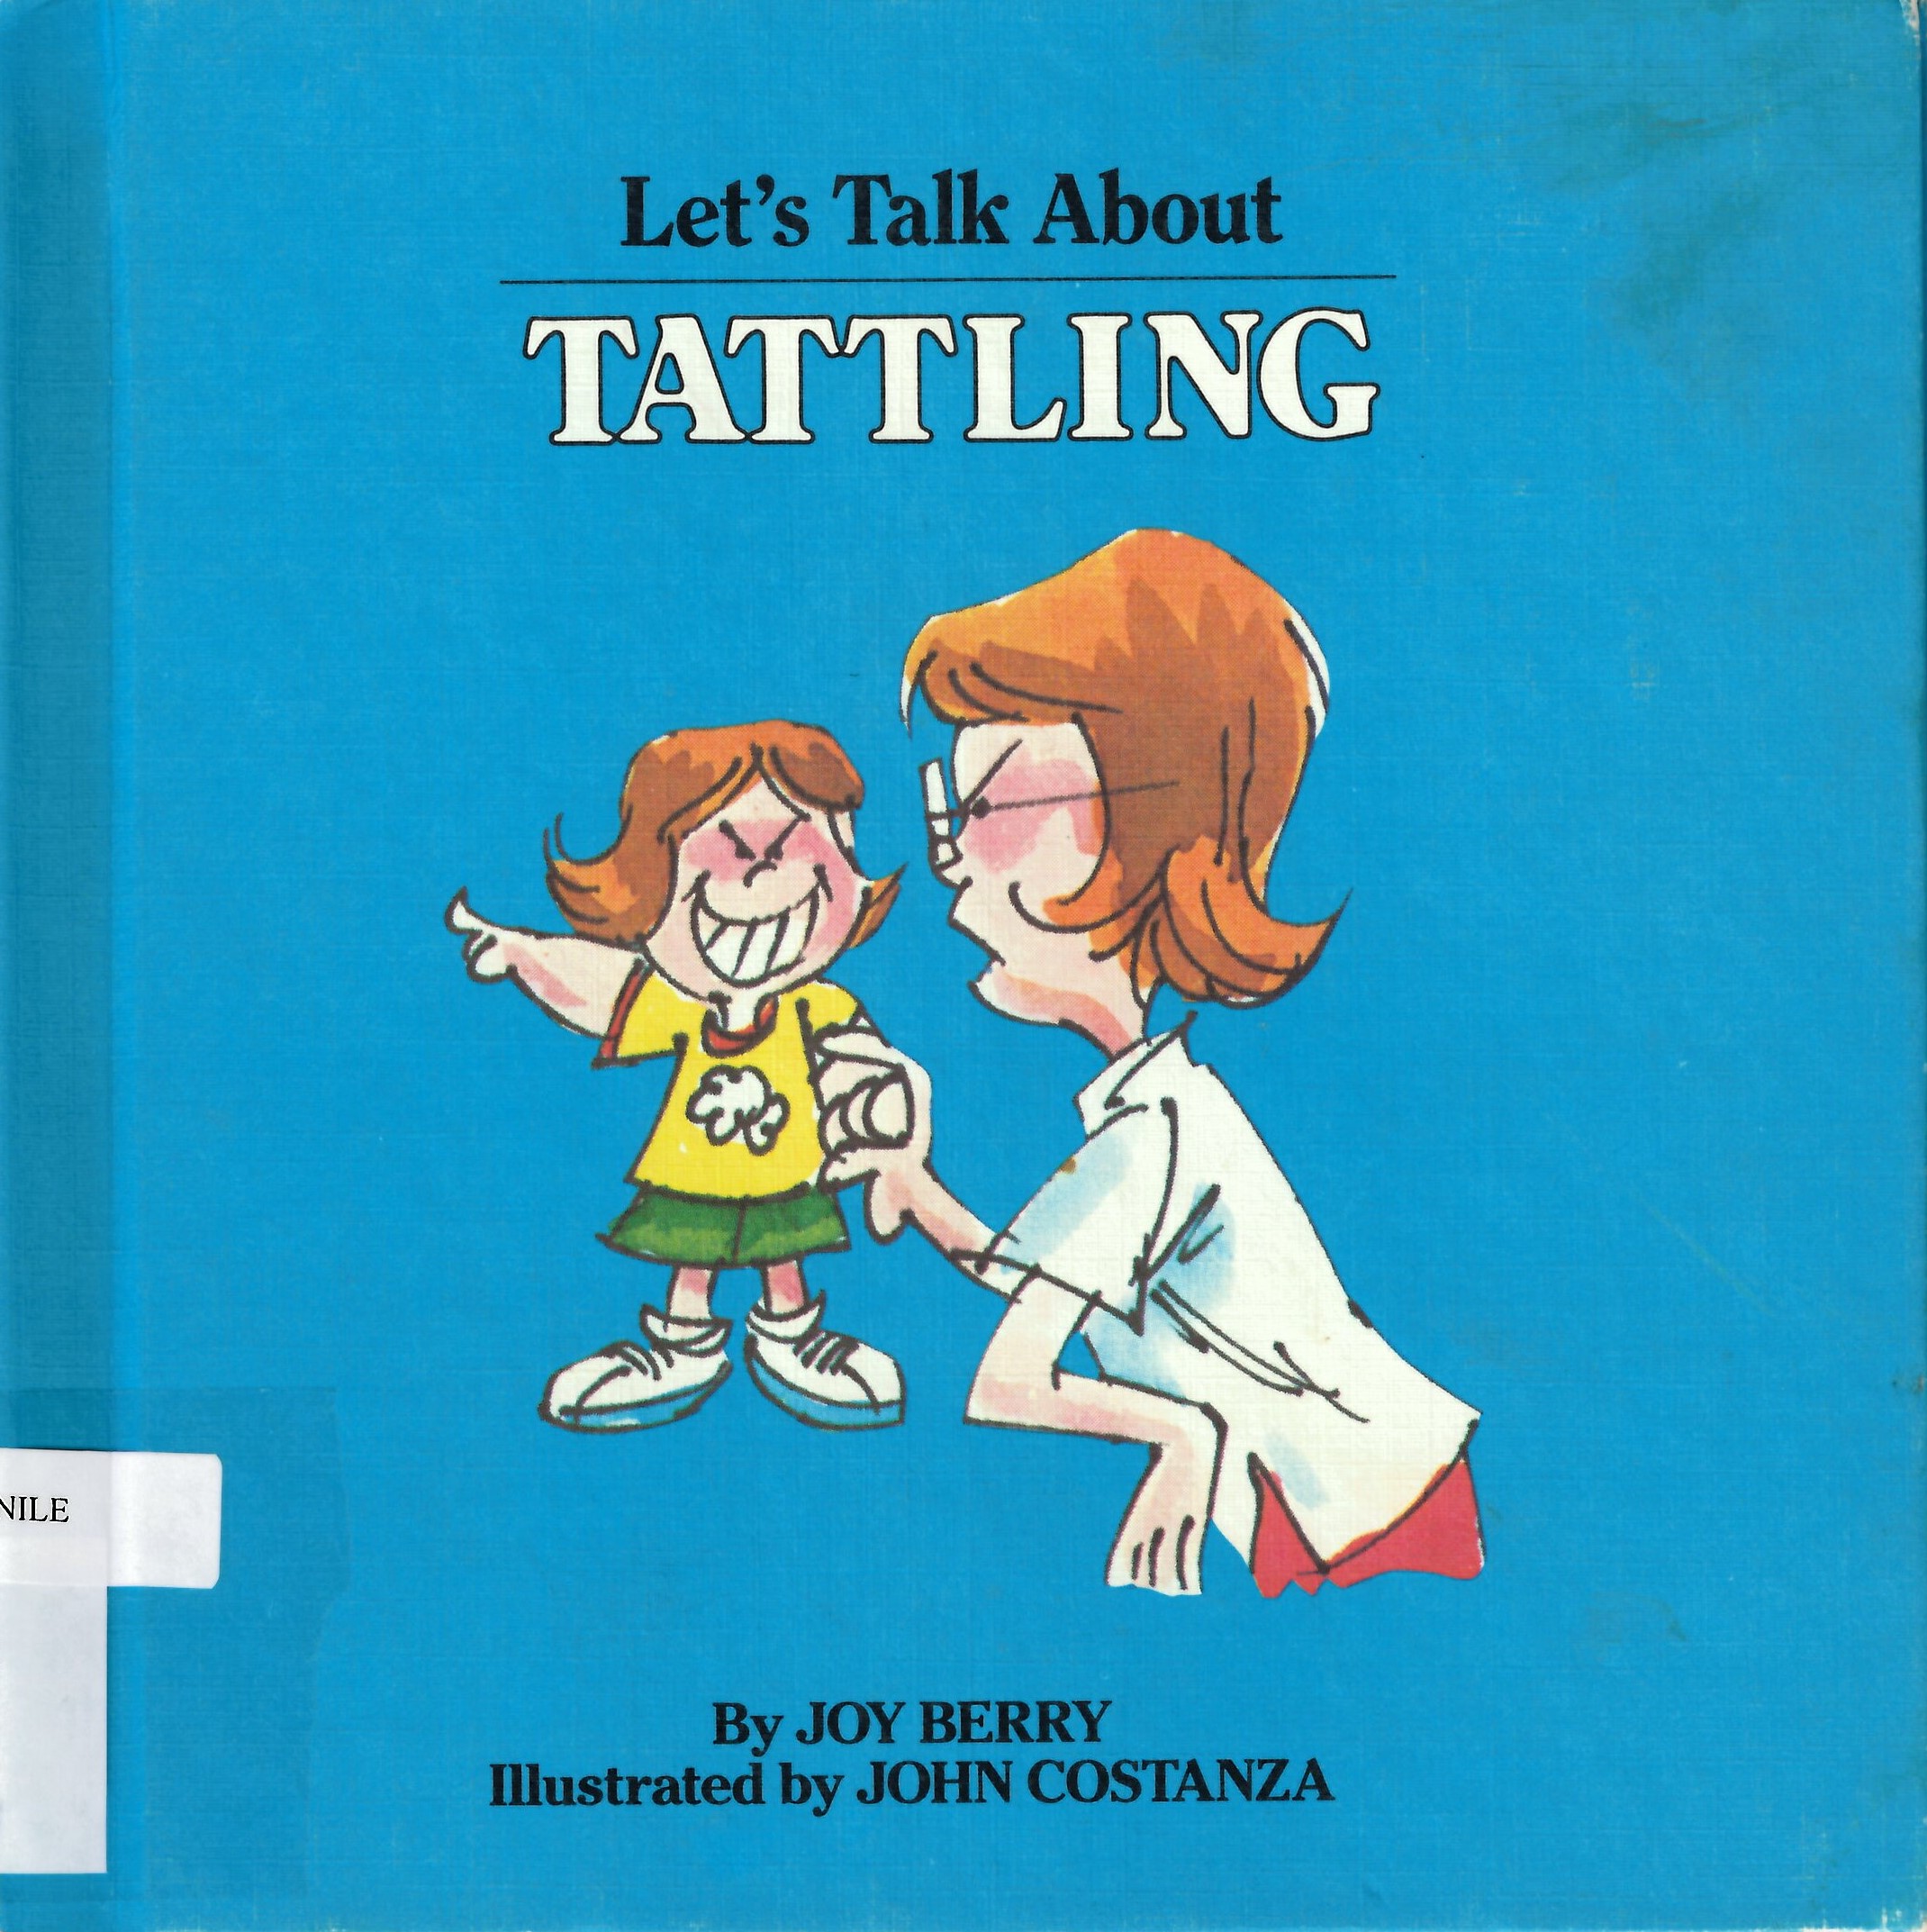 Let's talk about tattling